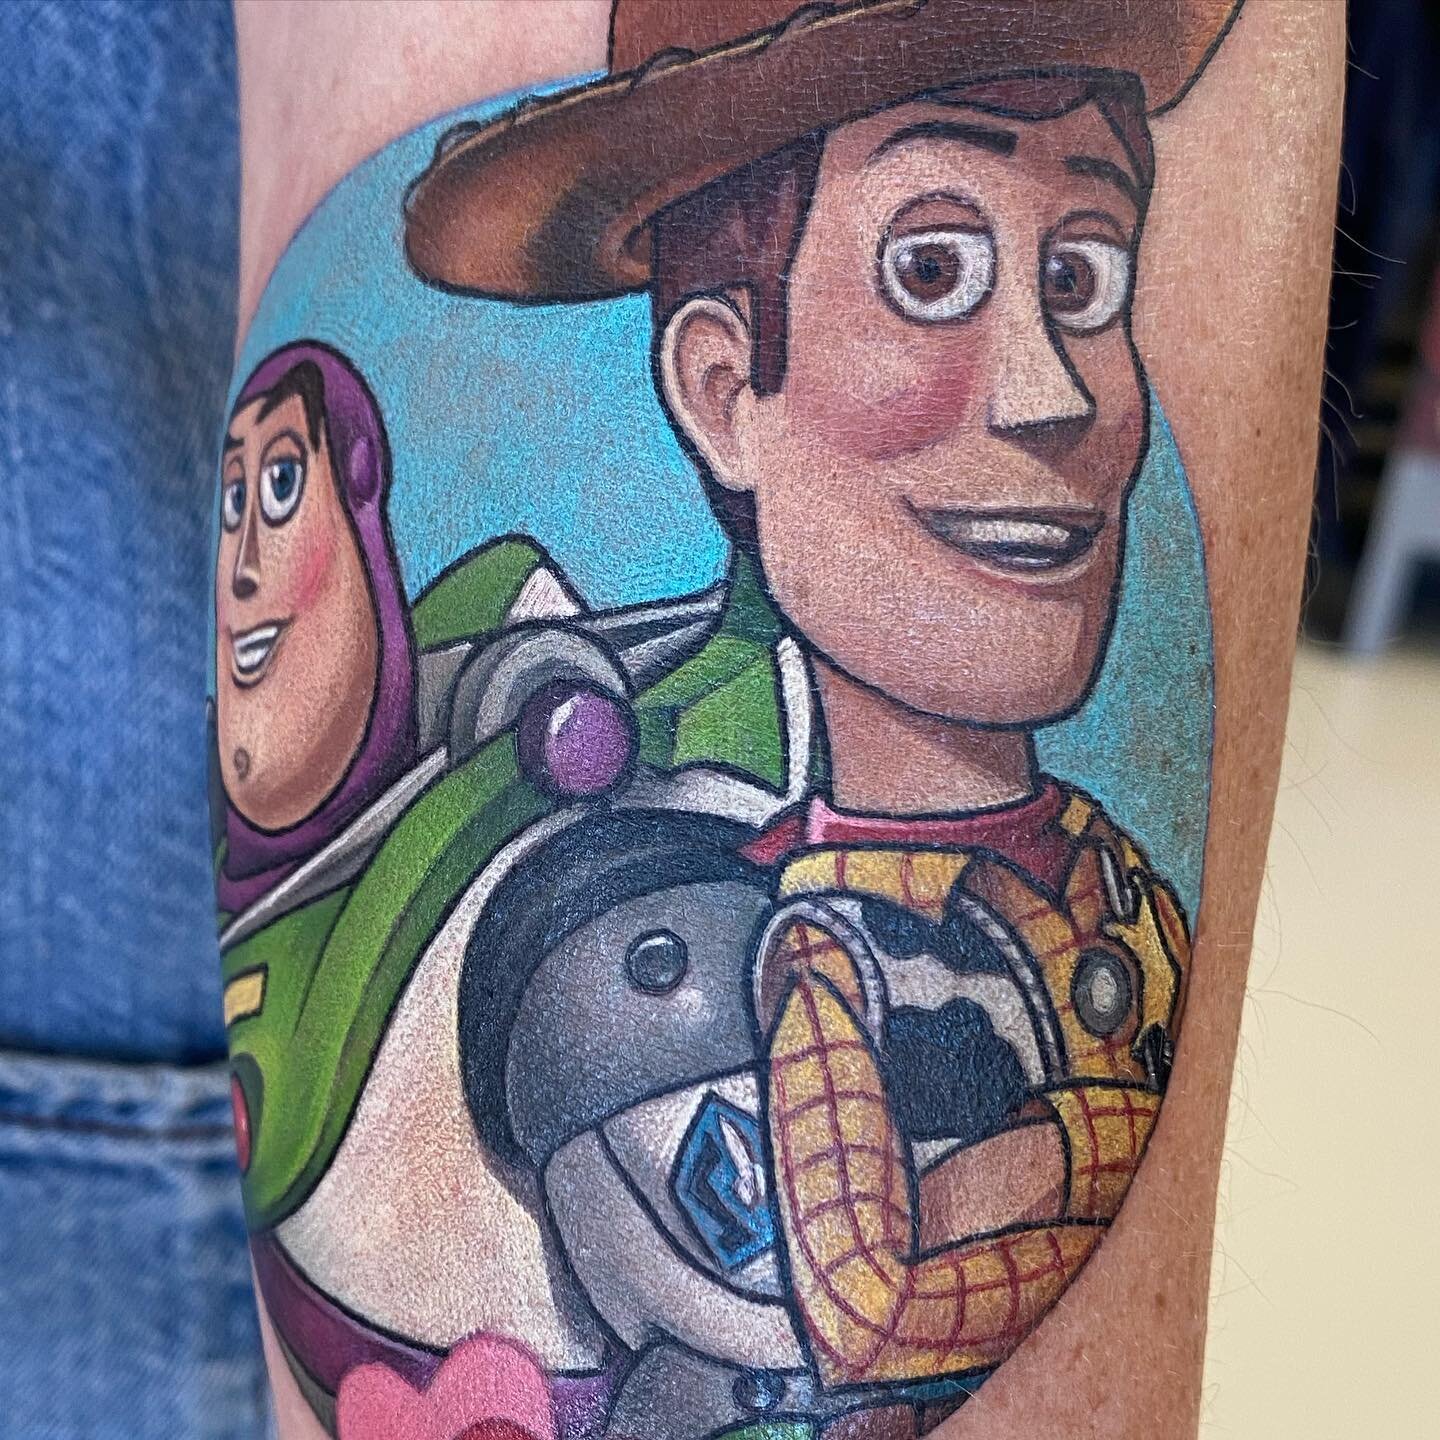 For Dani 😊
From June last year, this was quite small, on a petite arm! Big tattoos are always impressive but small tattoos are hard, a whole different skill set&hellip;

Made with @fusion_ink and @killerinktattoo supplies in #edinburgh

#toystory #t